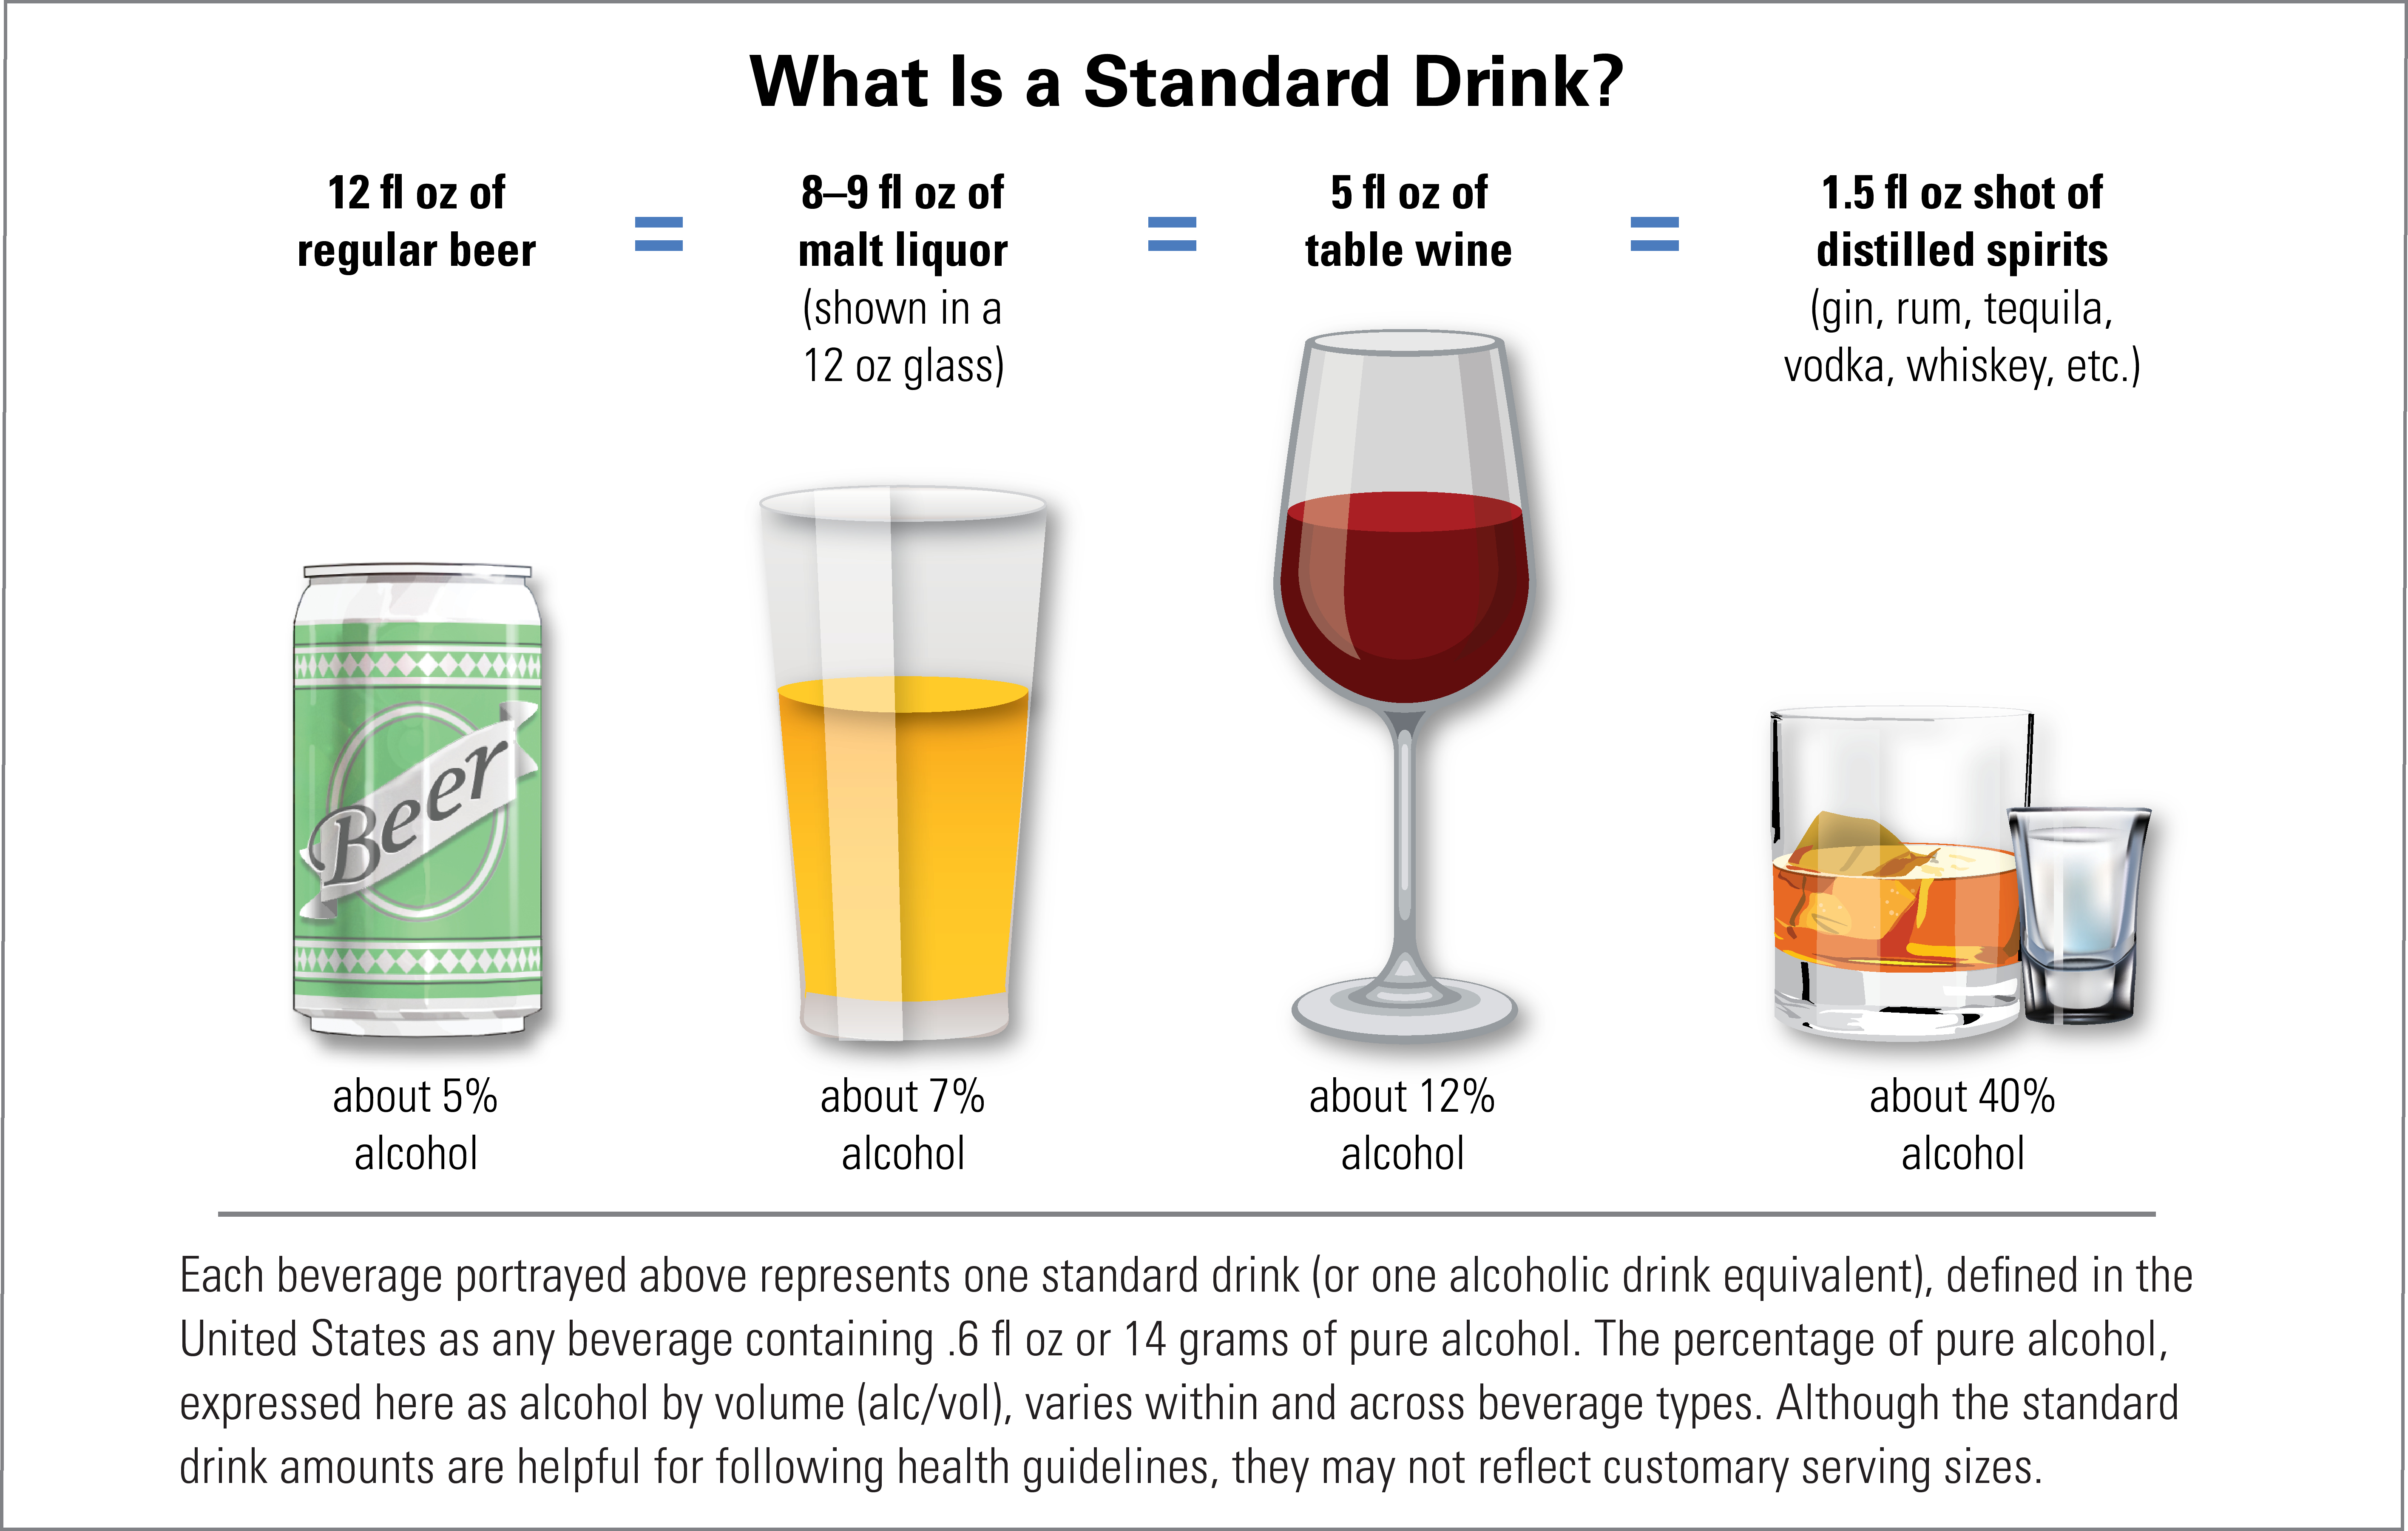 The same amount of alcohol is contained in 12 fluid ounces of regular beer, 8 to 9 fluid ounces of malt liquor, 5 fluid ounces of table wine, or a 1.5 fluid ounce shot of 80-proof spirits (âhard liquorâ such as whiskey, gin, etc.) The percent of âpureâ alcohol varies by beverage.